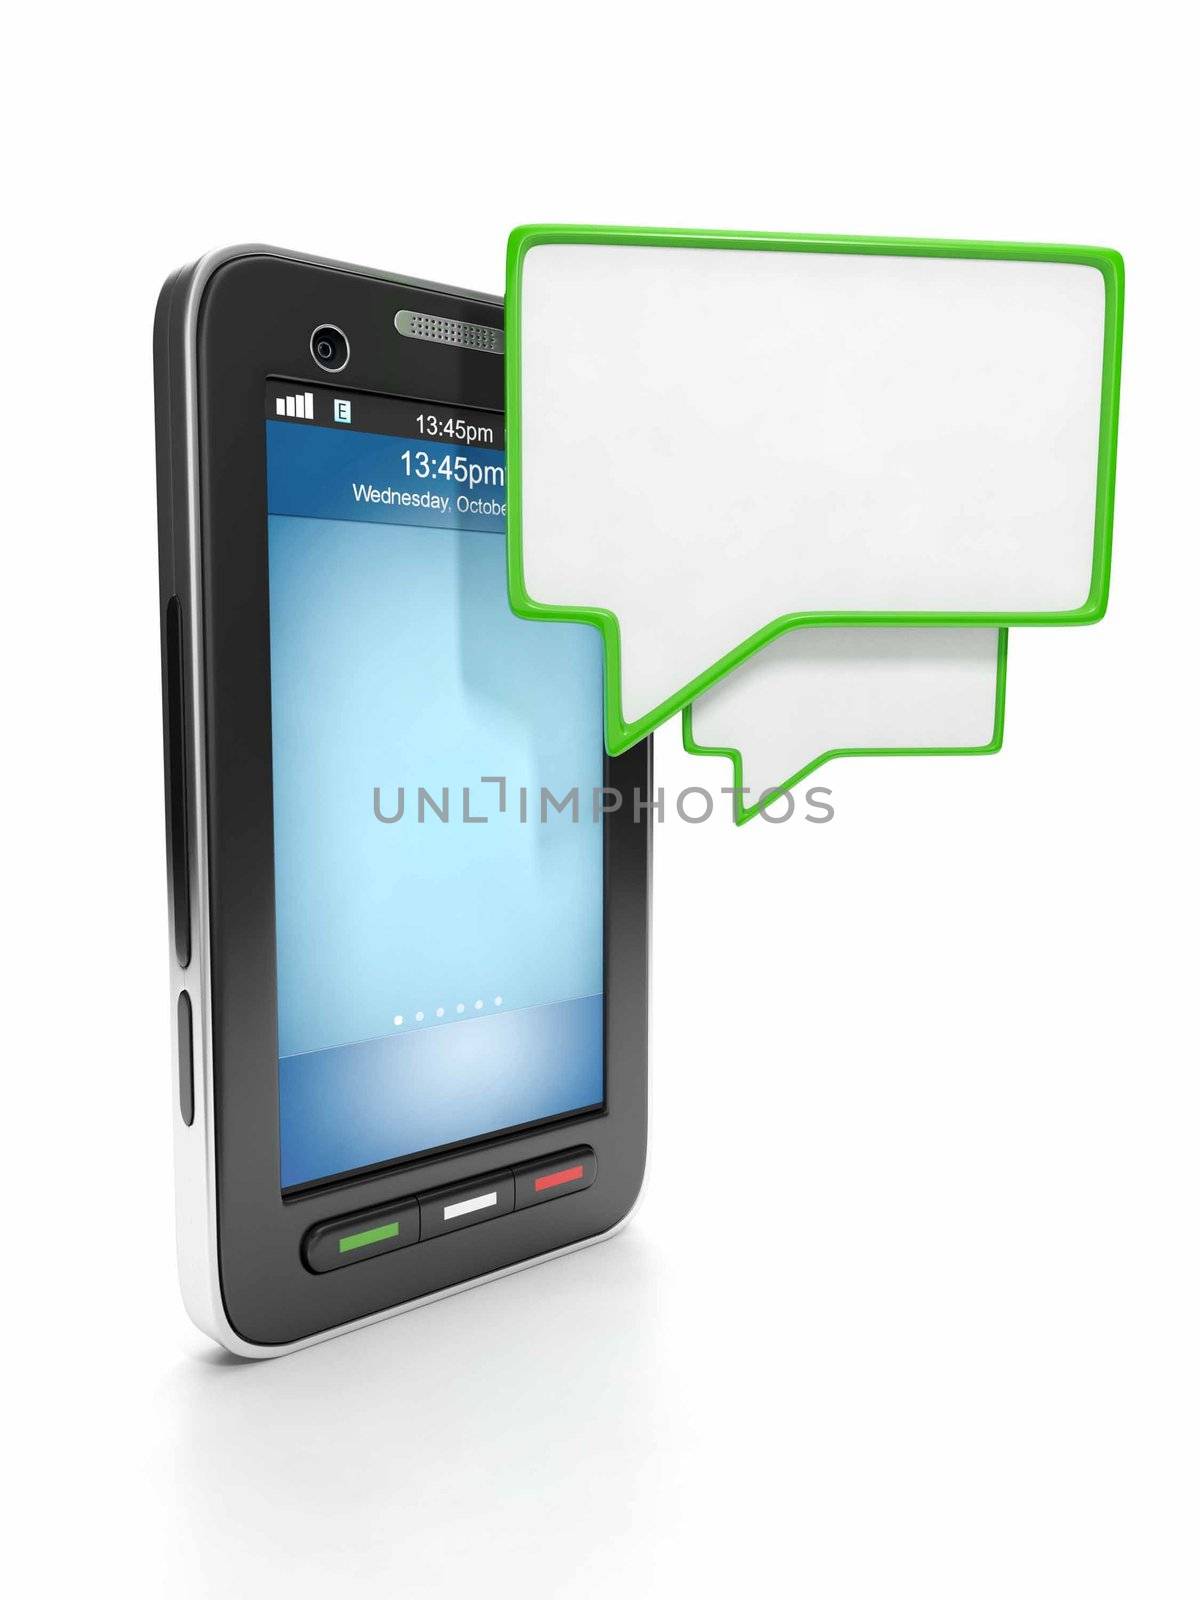 Mobile technology. Communication through instant messaging on a  by kolobsek